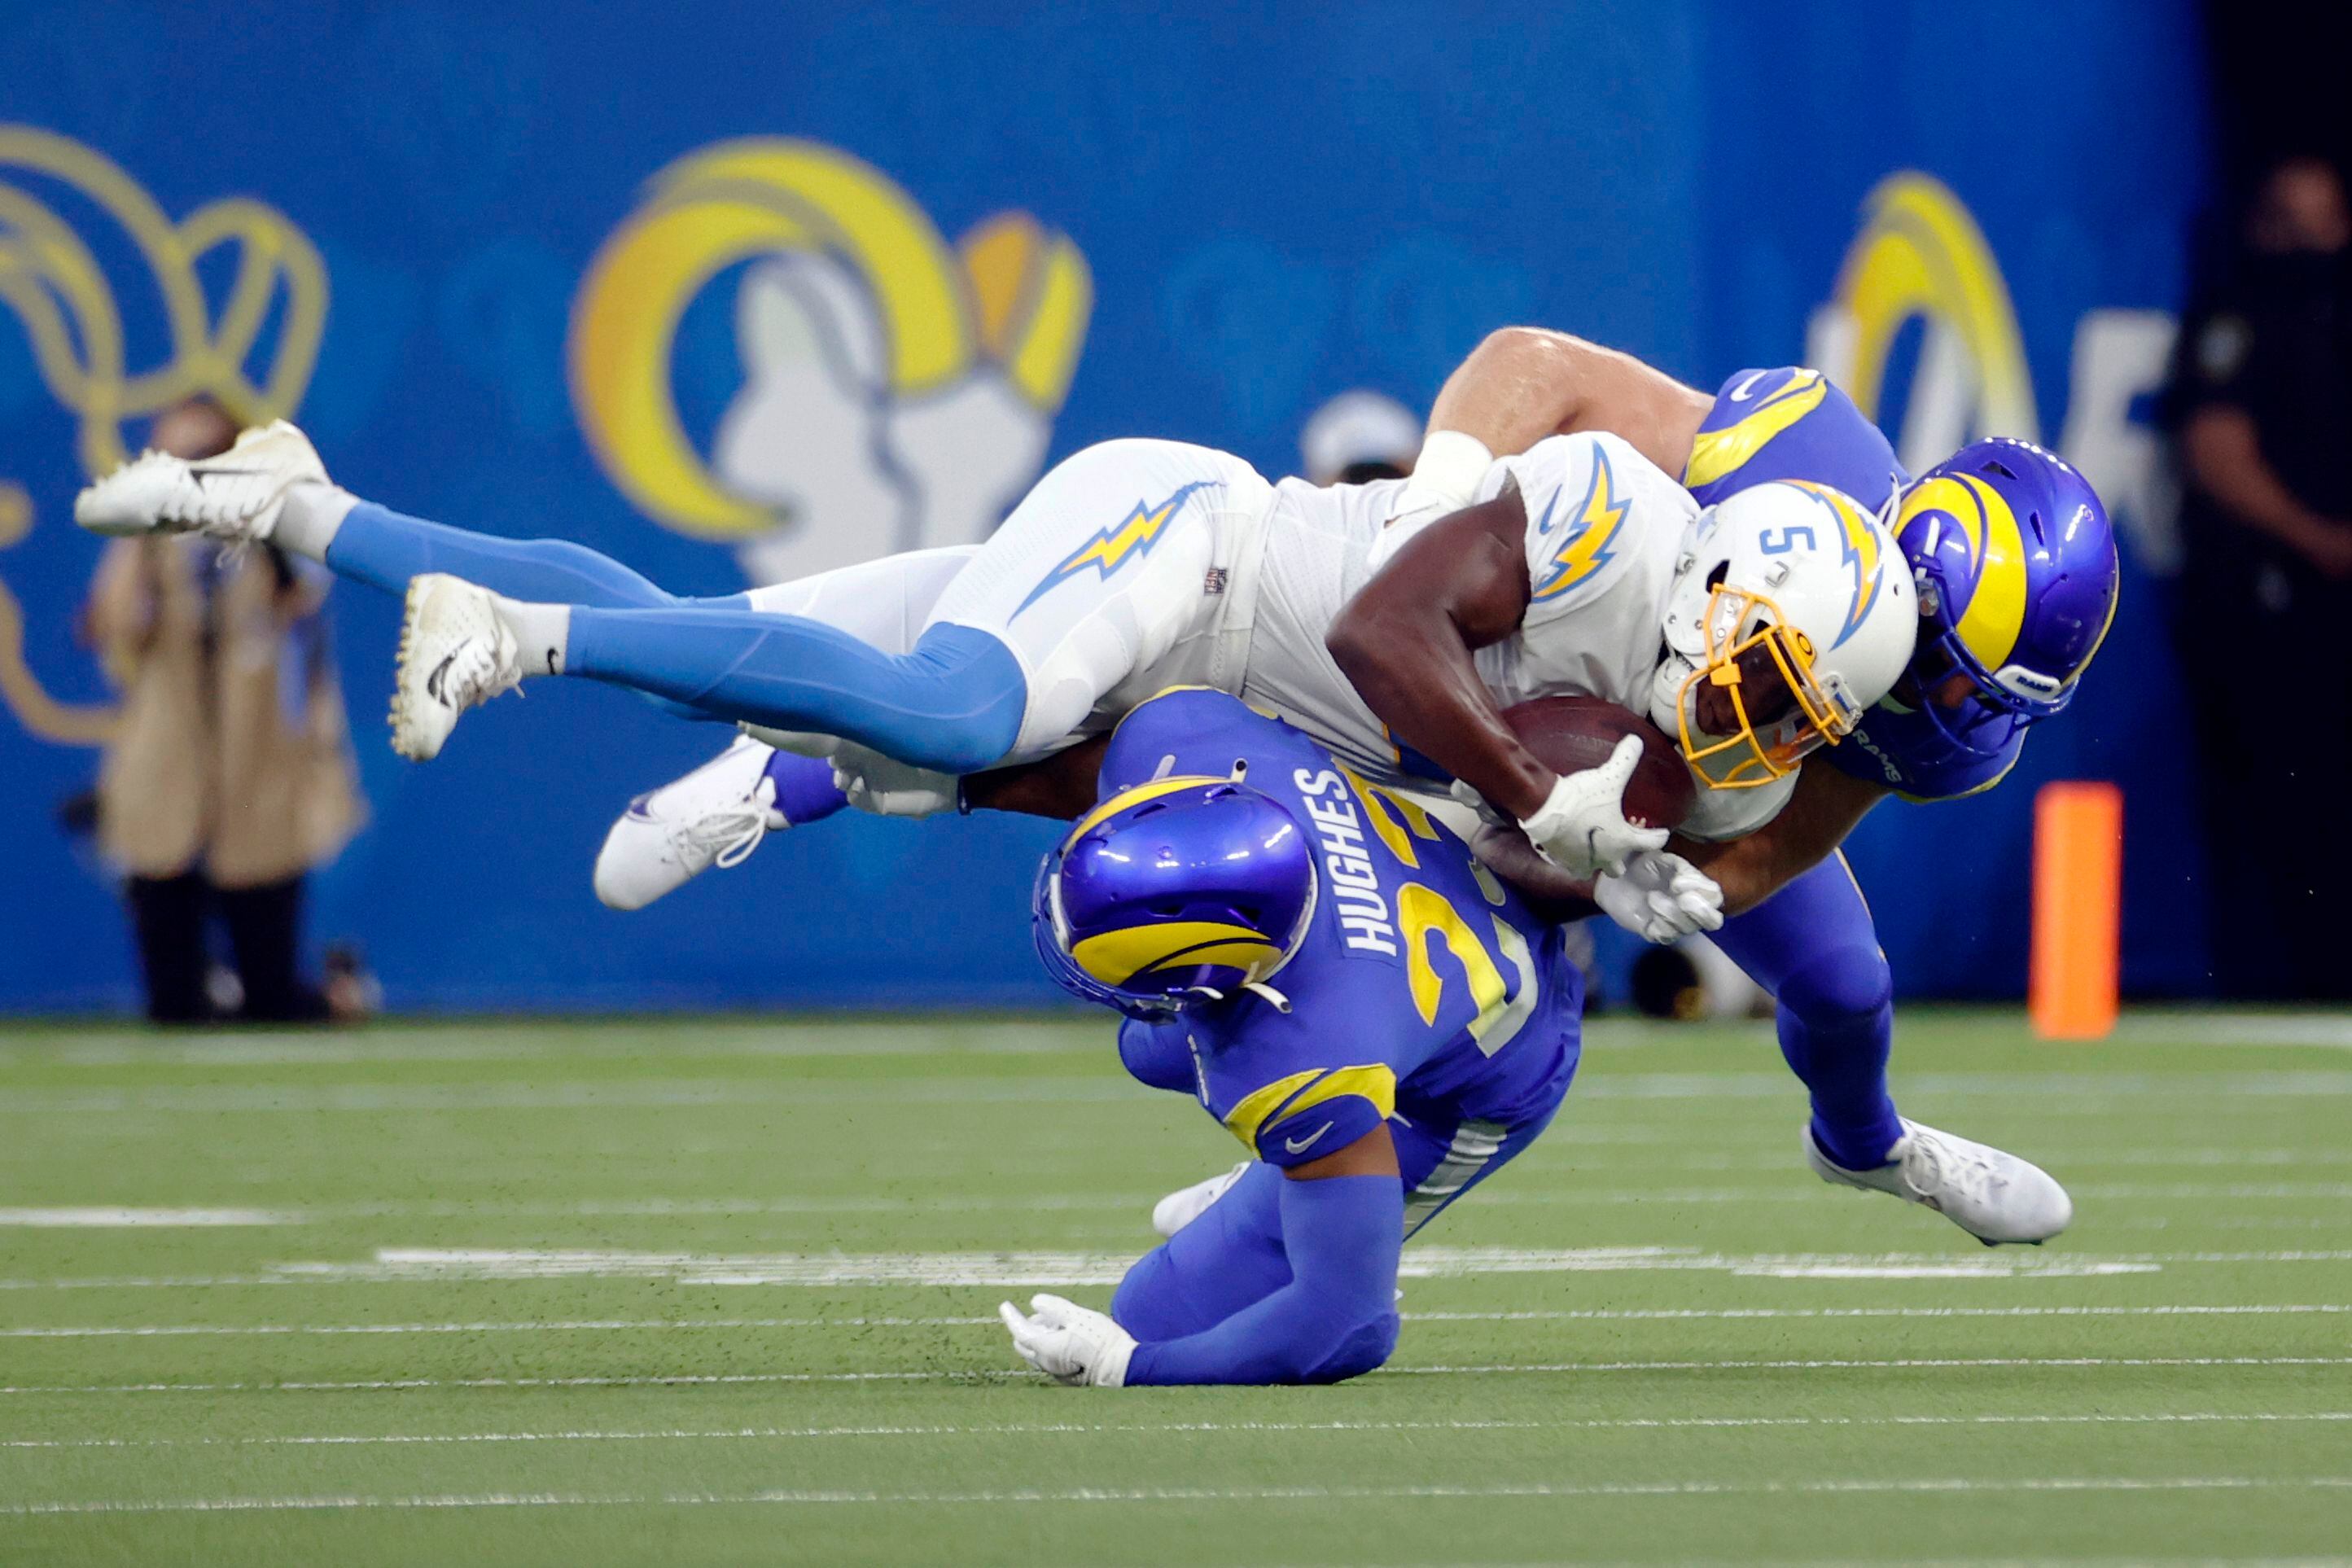 Chargers Final Score: Chargers 23, 49ers 12 - Bolts From The Blue